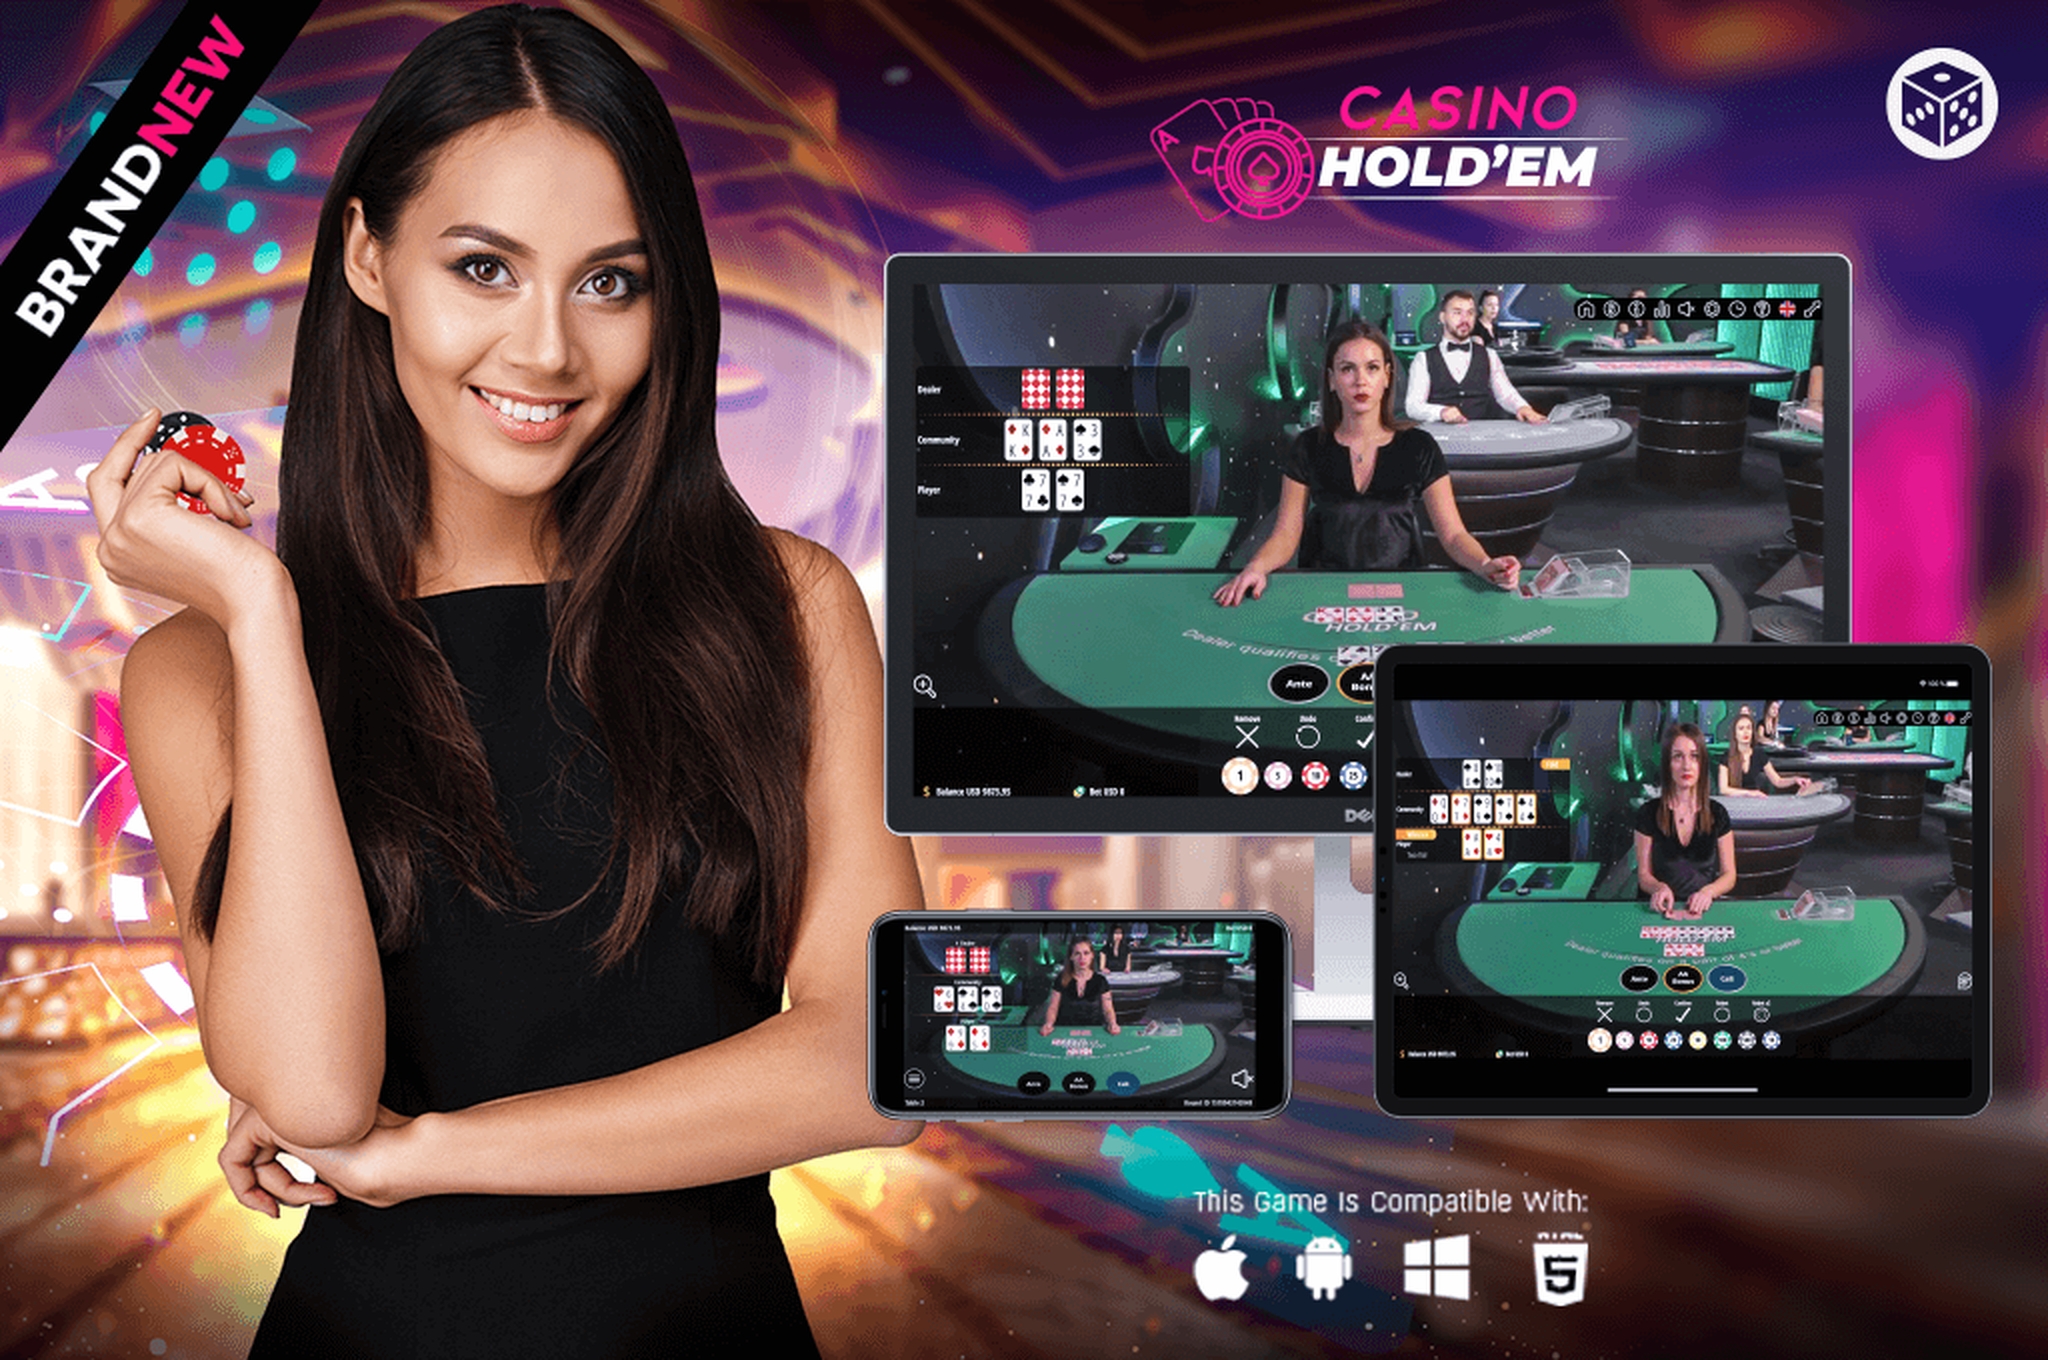 The Roulette Live Casino Online Slot Demo Game by Vivo Gaming